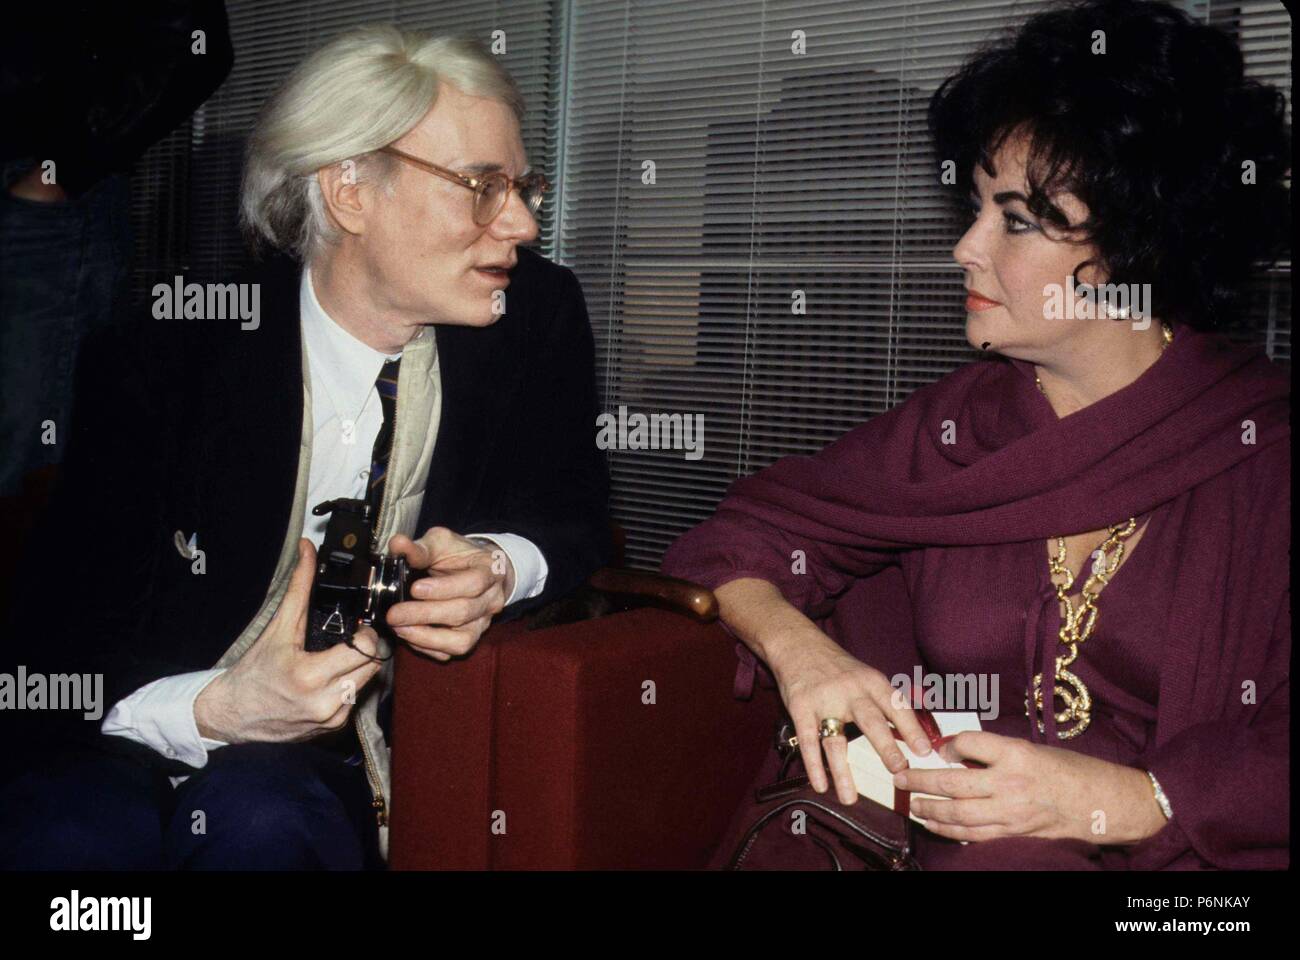 Warhol Taylor3742.JPG New York, NY 1978  Andy Warhol & Liz Taylor Digital photo by Adam Scull/PHOTOlink/MediaPunch ONE TIME REPRODUCTION RIGHTS ONLY NO WEBSITE USE WITHOUT AGREEMENT 718-487-4334-OFFICE  718-374-3733-FAX (Newscom TagID: phlphotos222070.jpg) [Photo via Newscom] Stock Photo